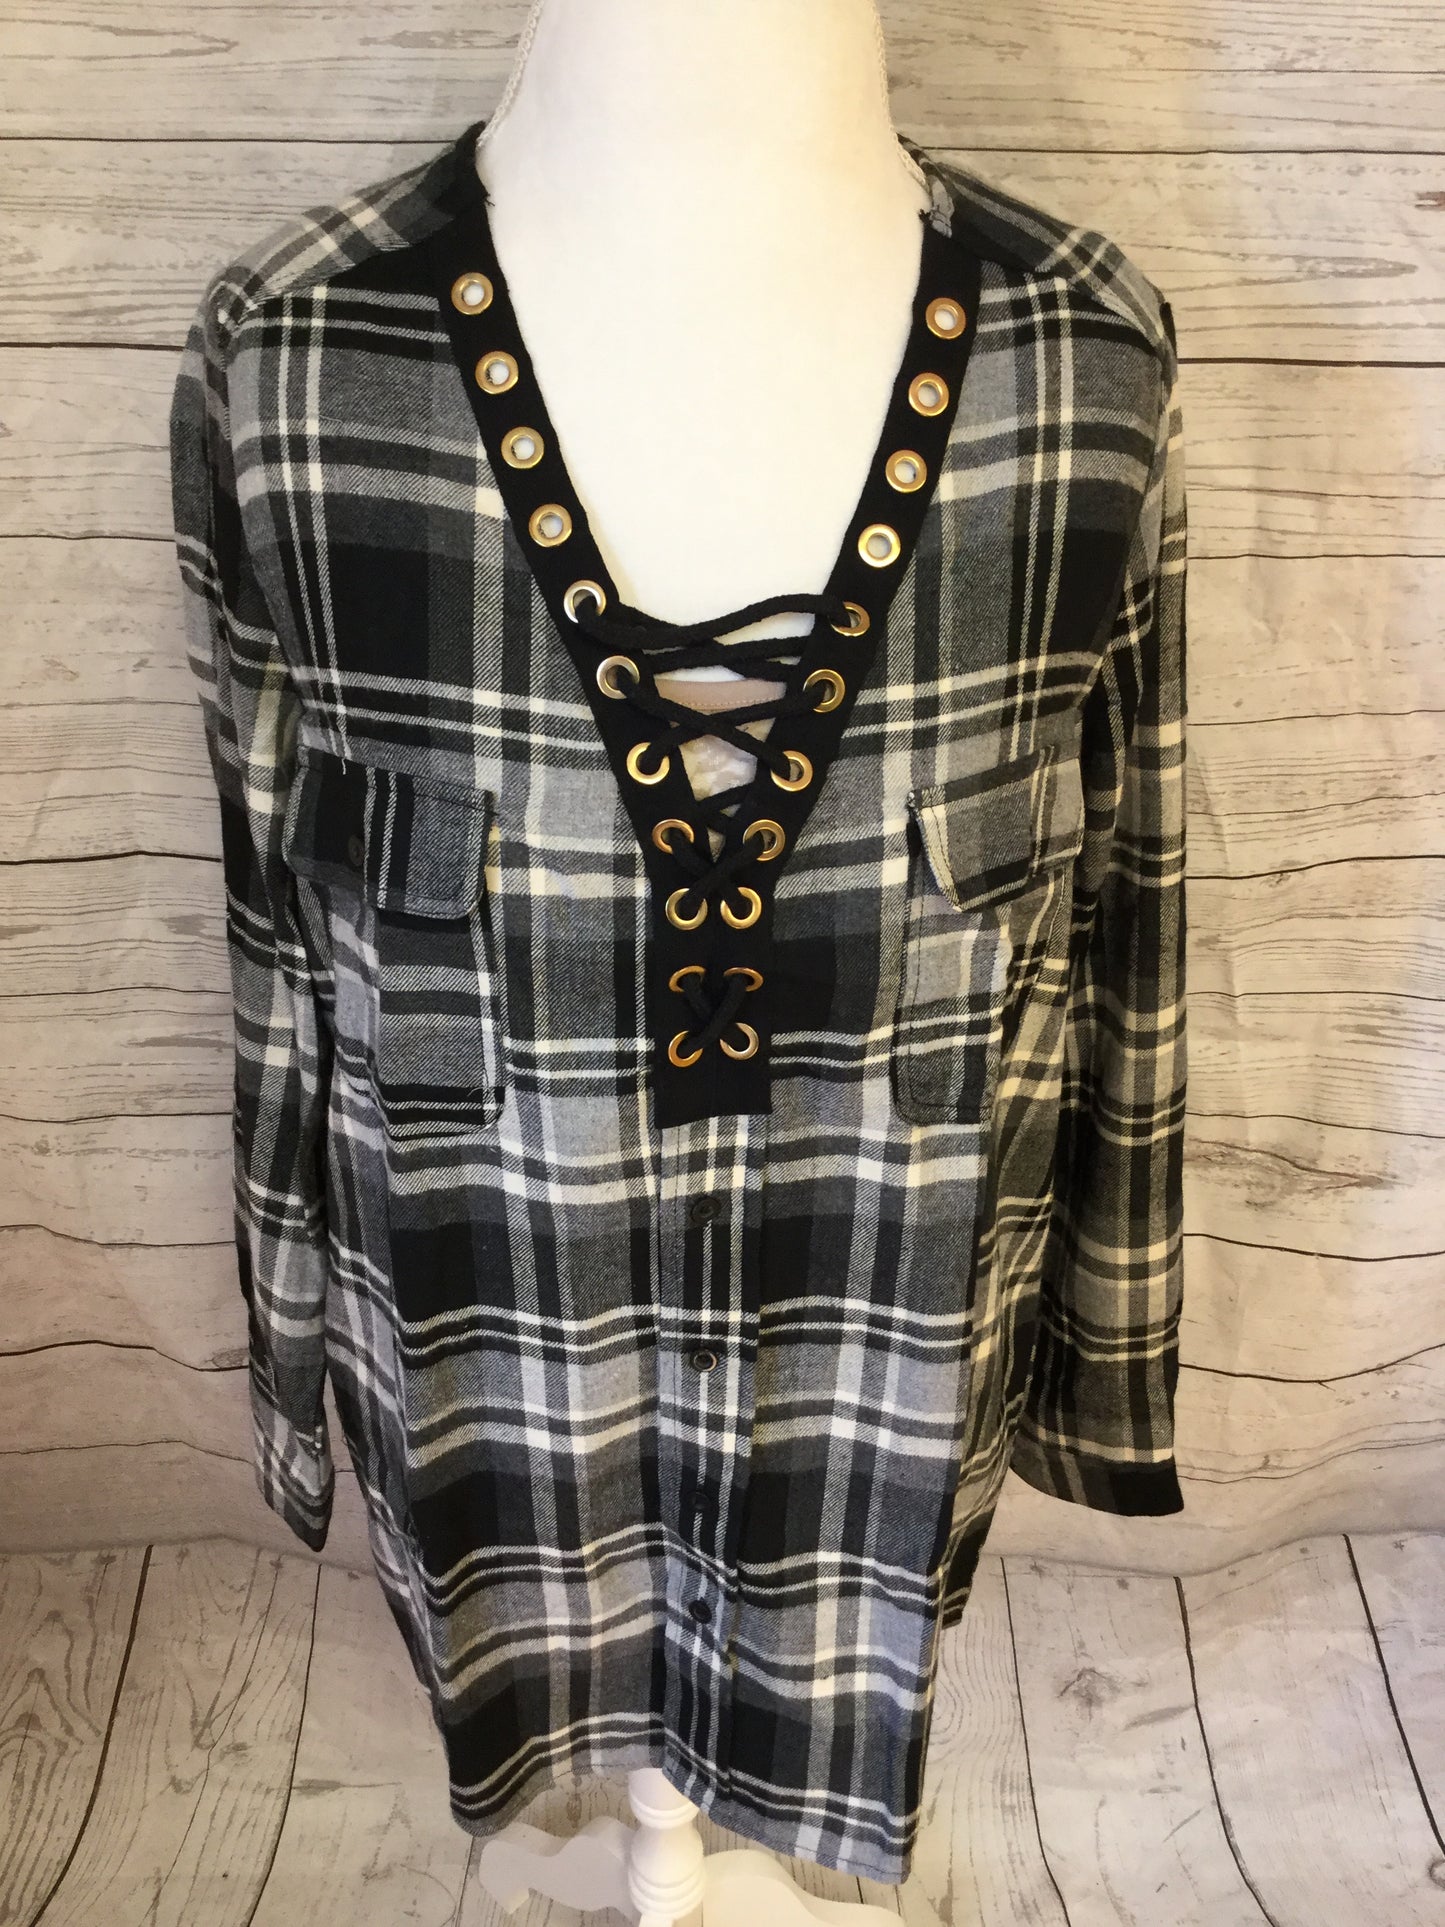 Lace Up Plaid Black and White Flannel To